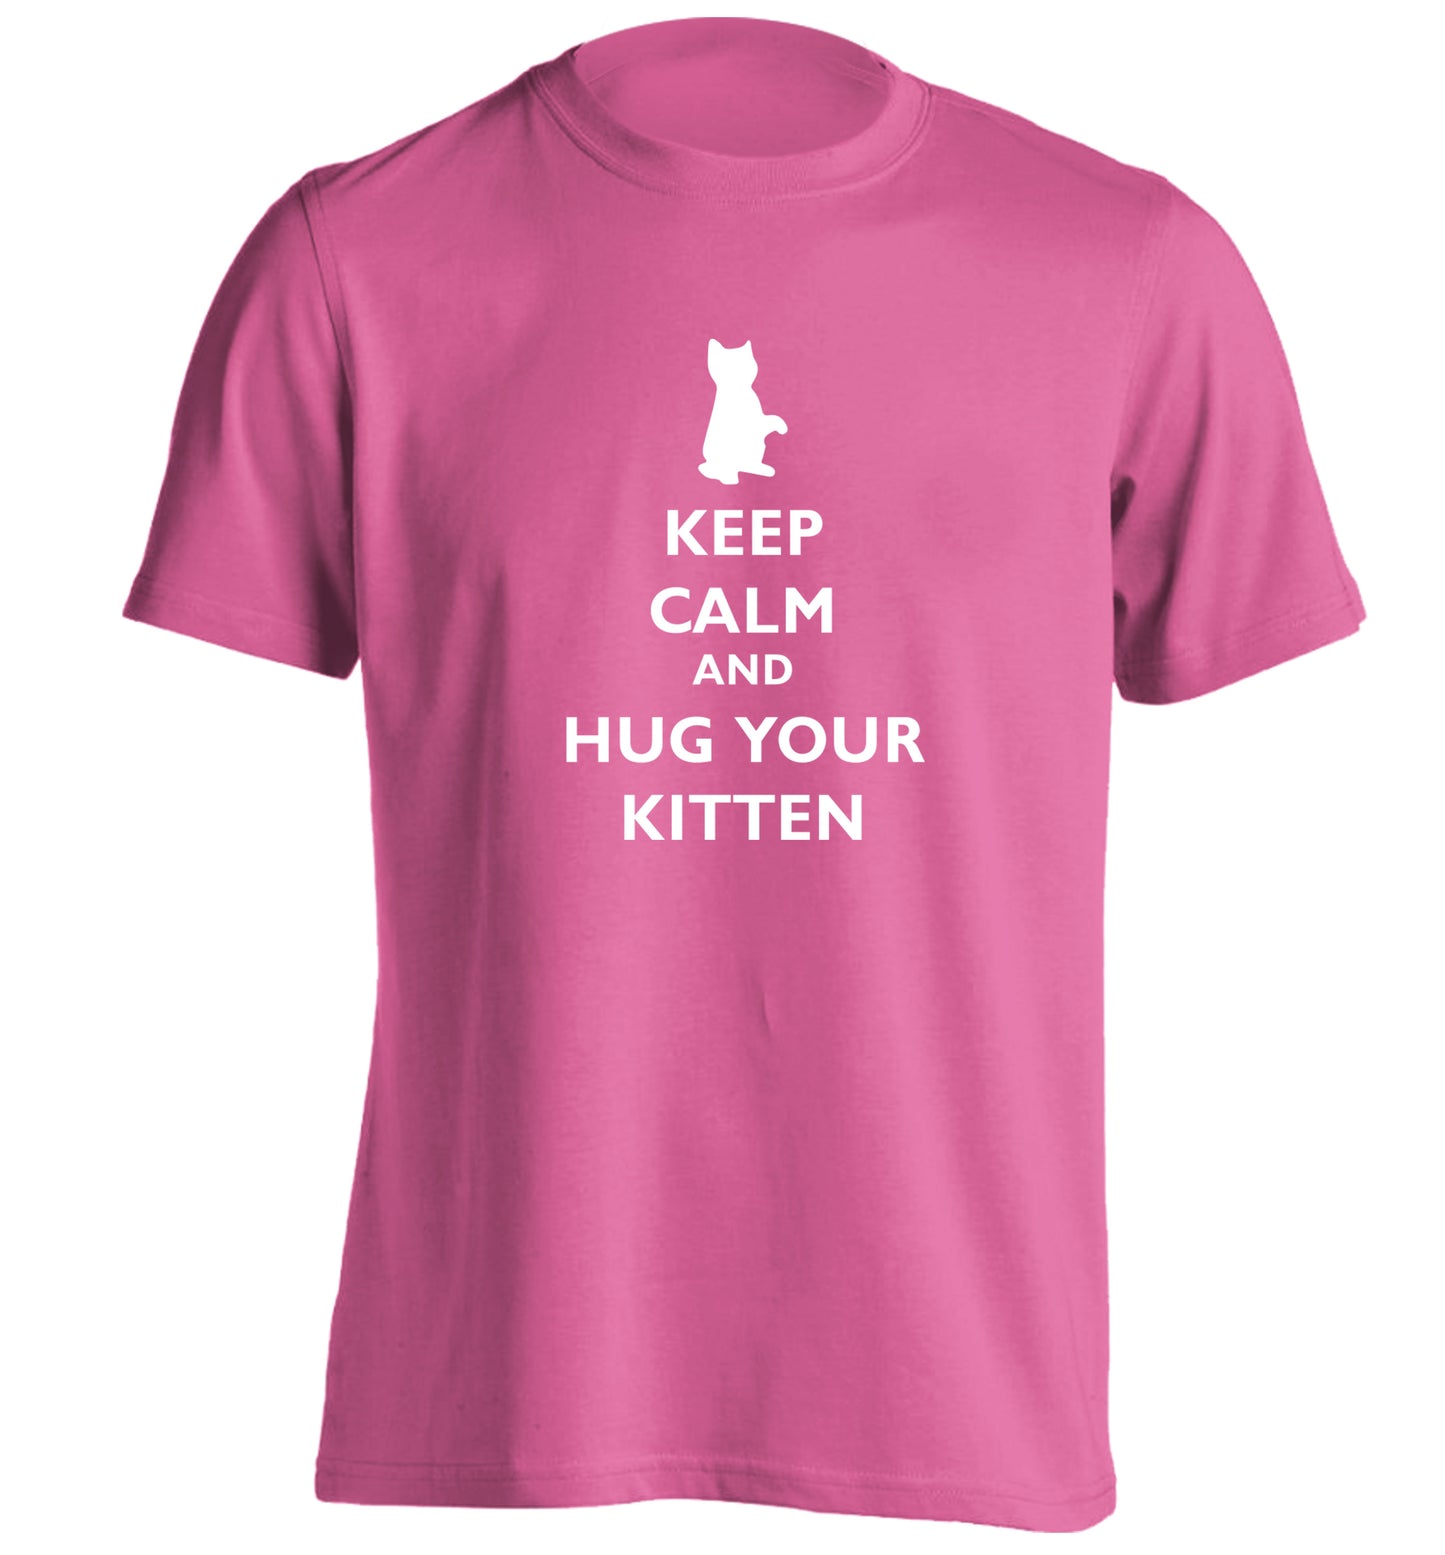 Keep calm and hug your kitten adults unisex pink Tshirt 2XL